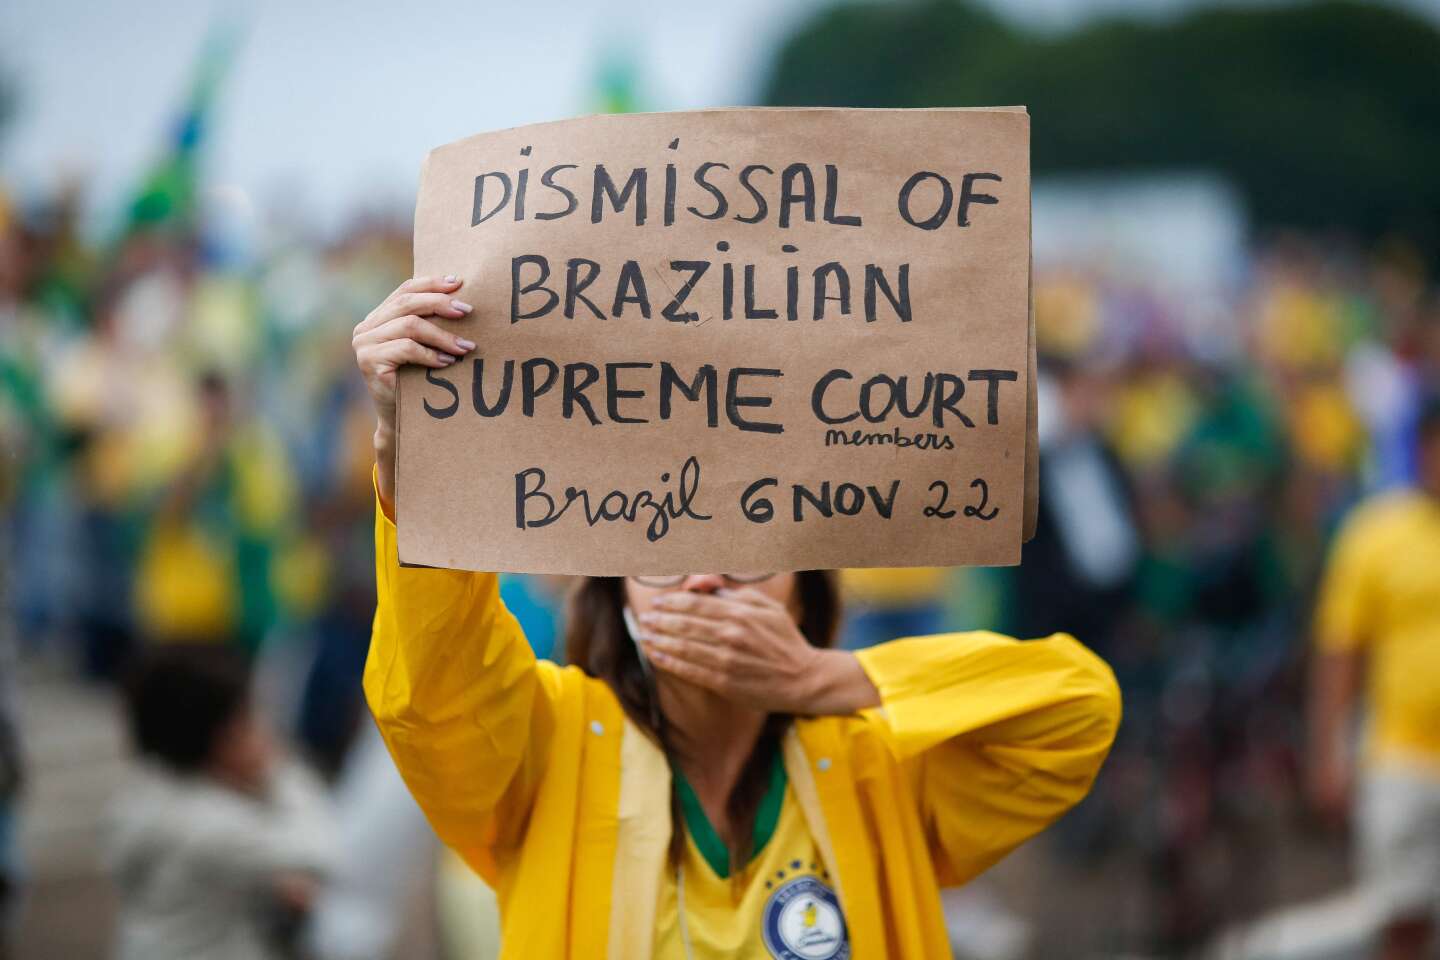 In Brazil, Lula is fueling misinformation and controversy before taking office in January